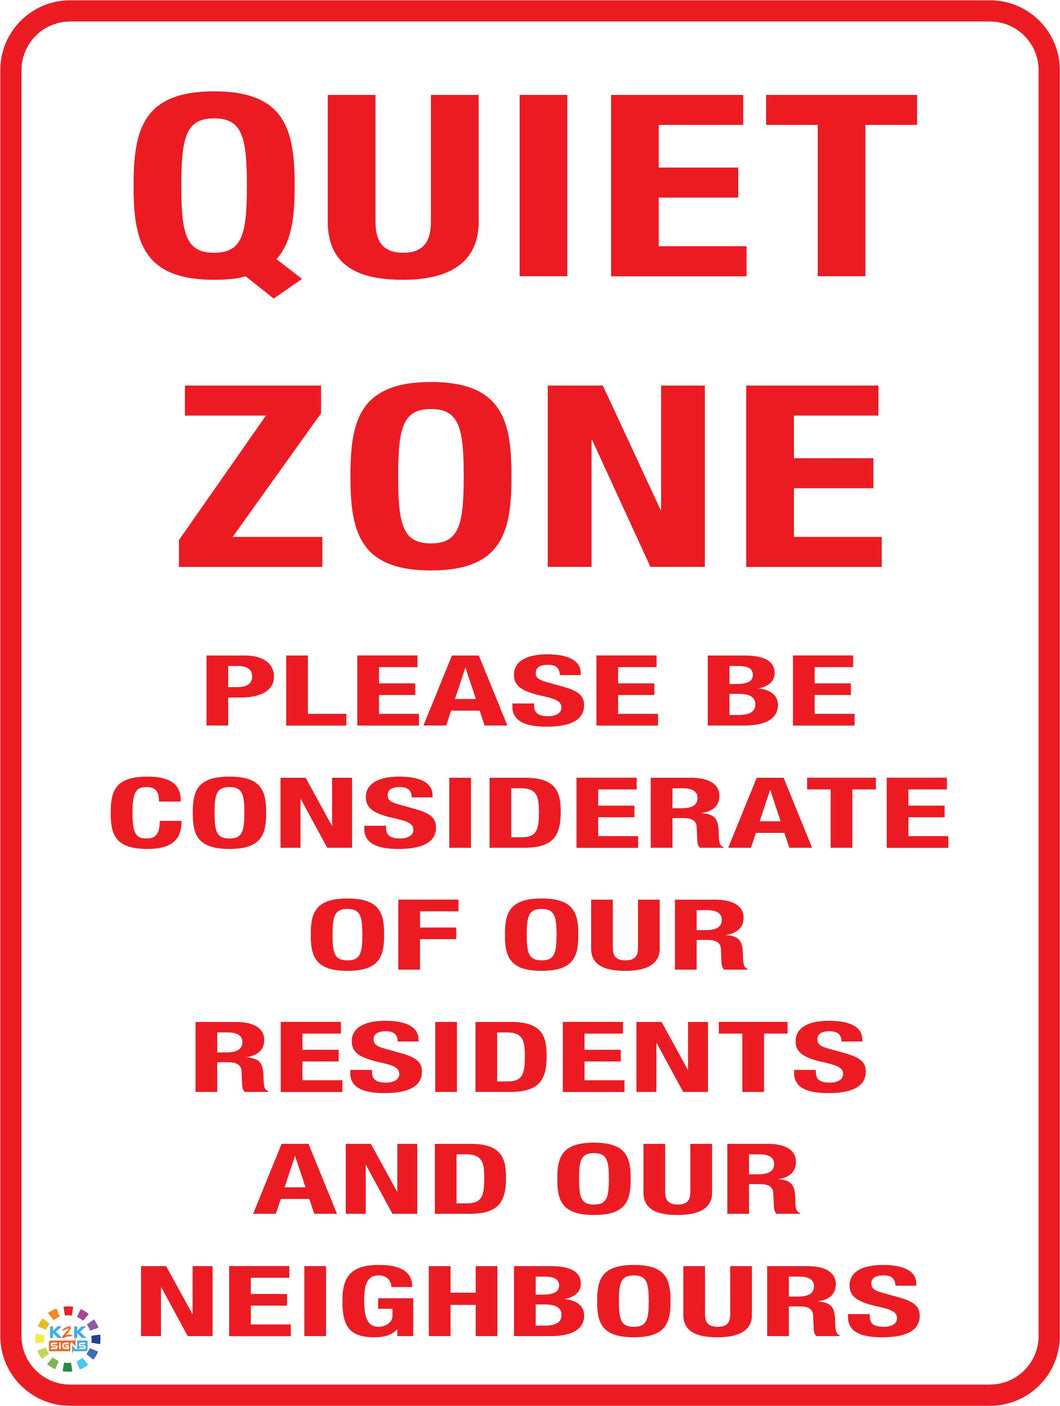 Quite Zone - Please Be Considerate Of Our Residents Sign